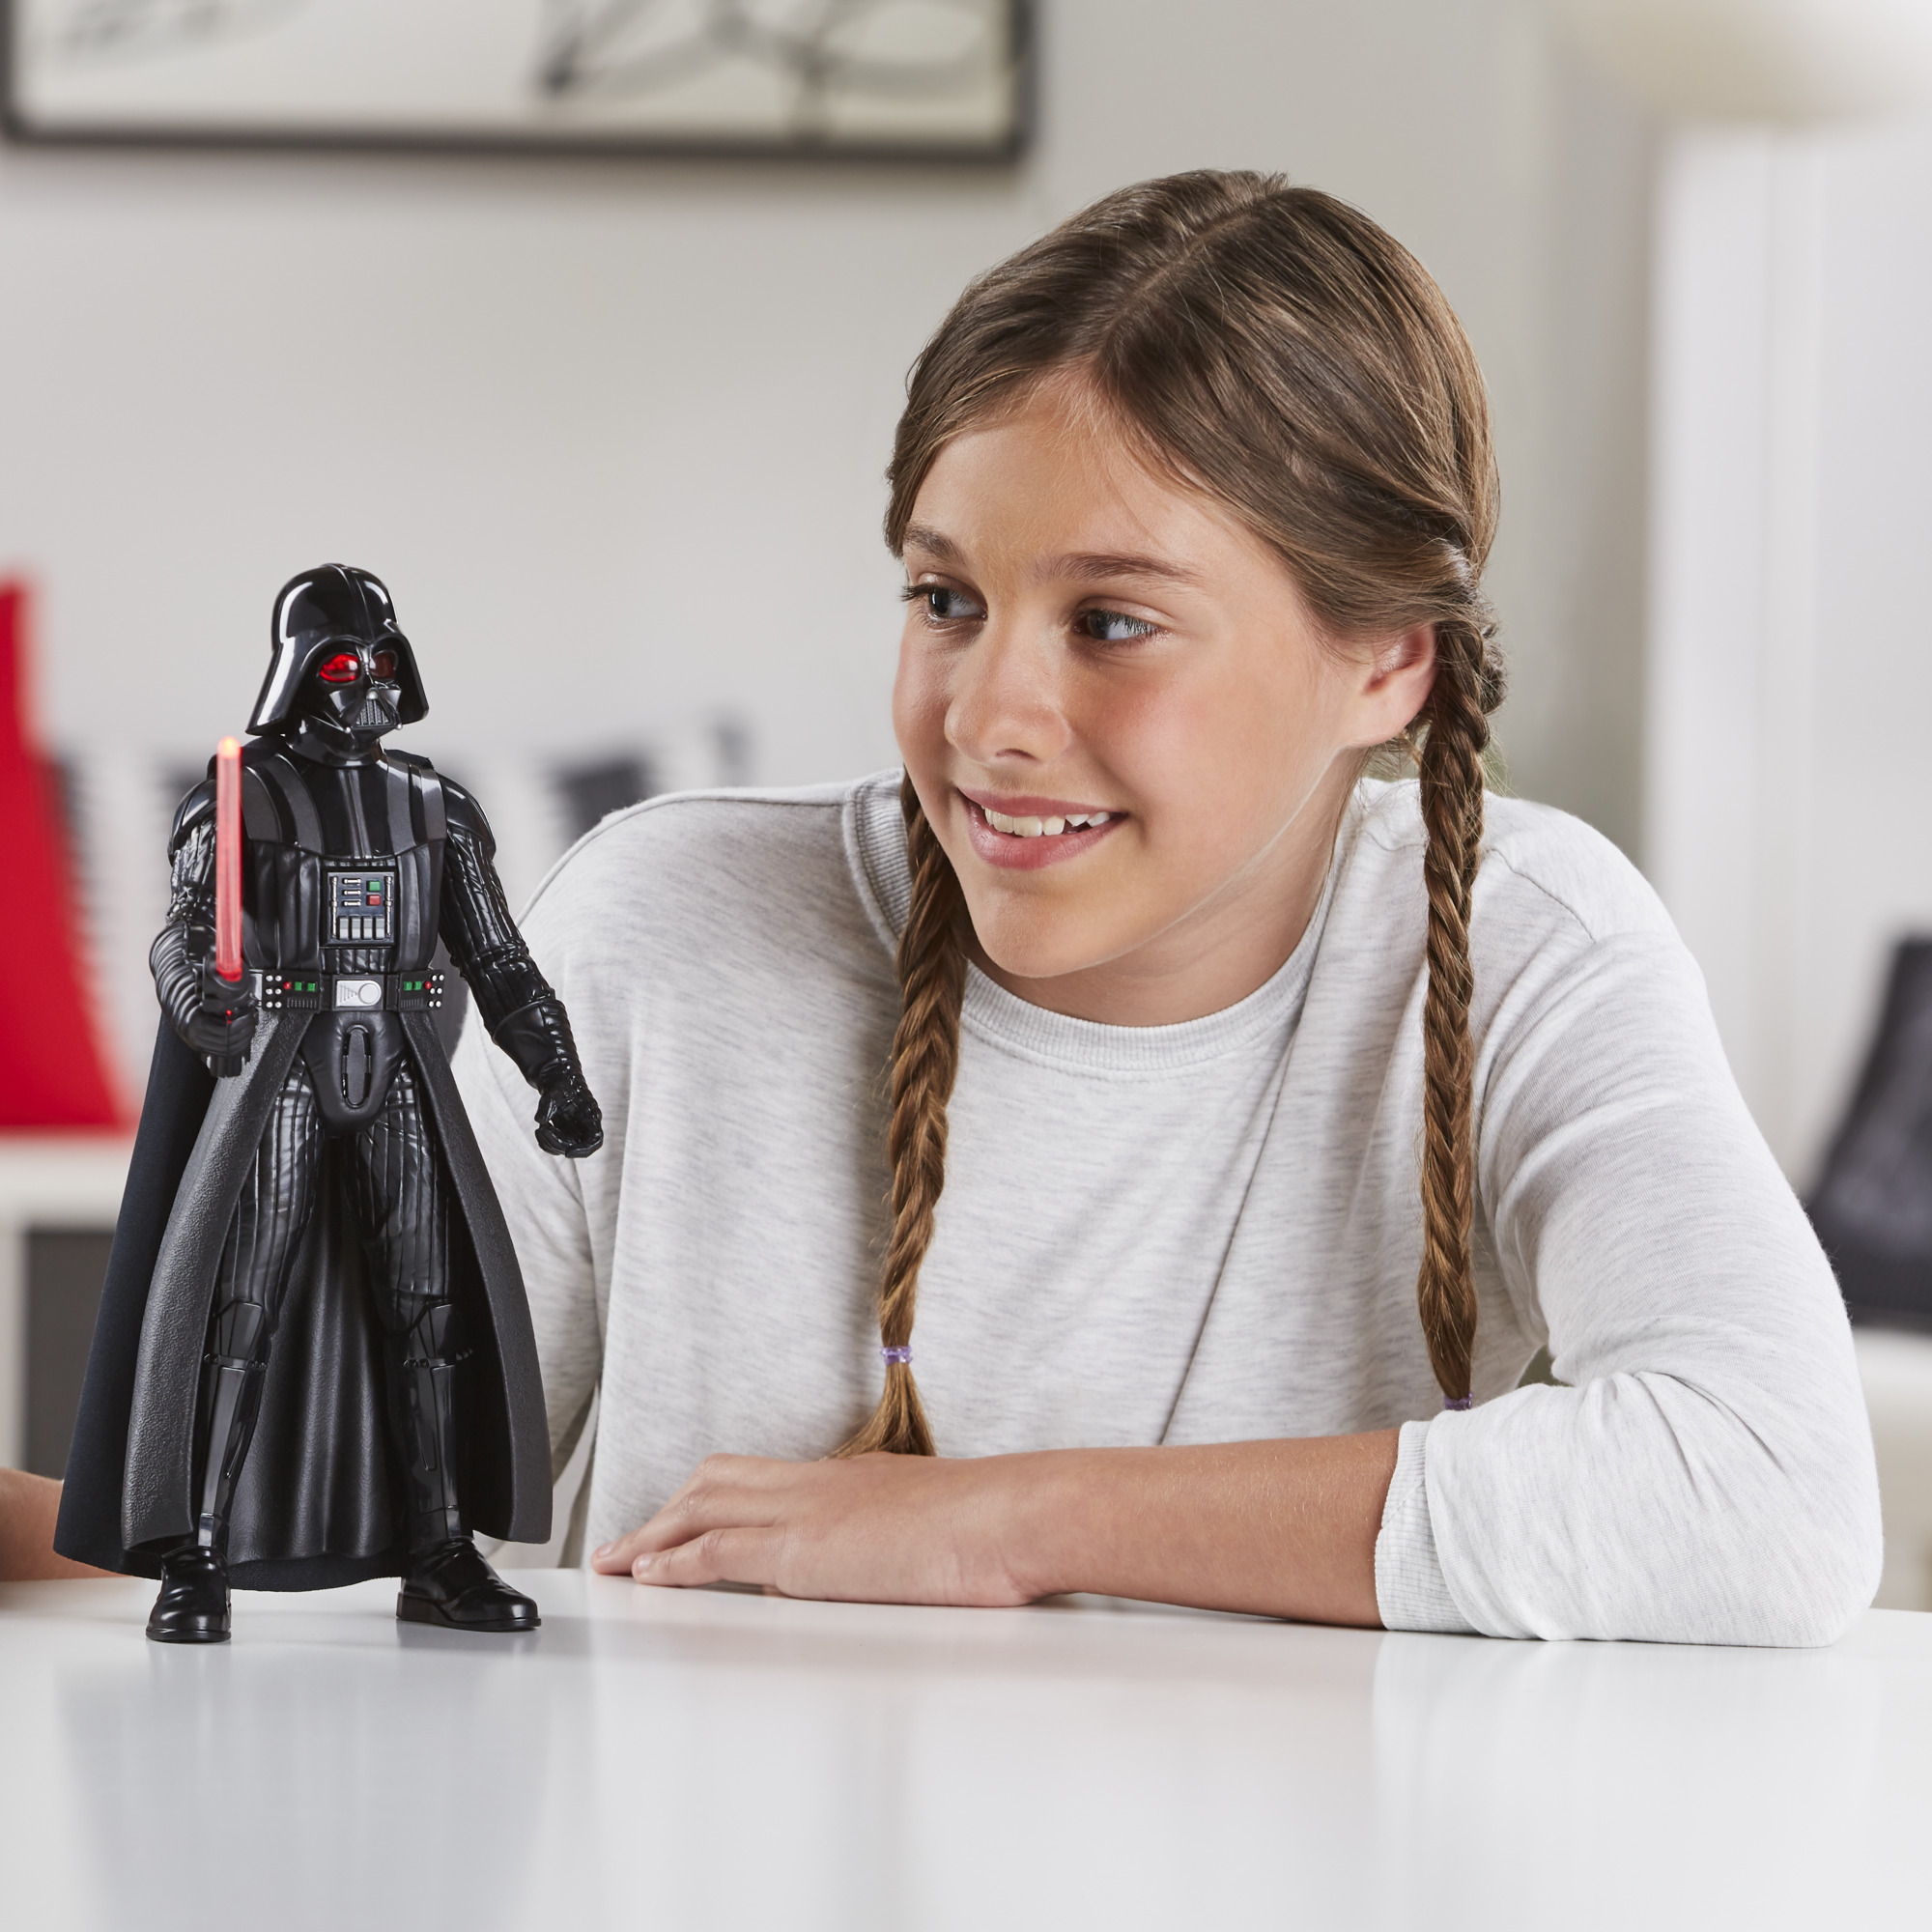 Star Wars: Obi-Wan Kenobi Darth Vader Toy Action Figure for Boys and Girls Ages 4 5 6 7 8 and Up (12”) - image 8 of 11